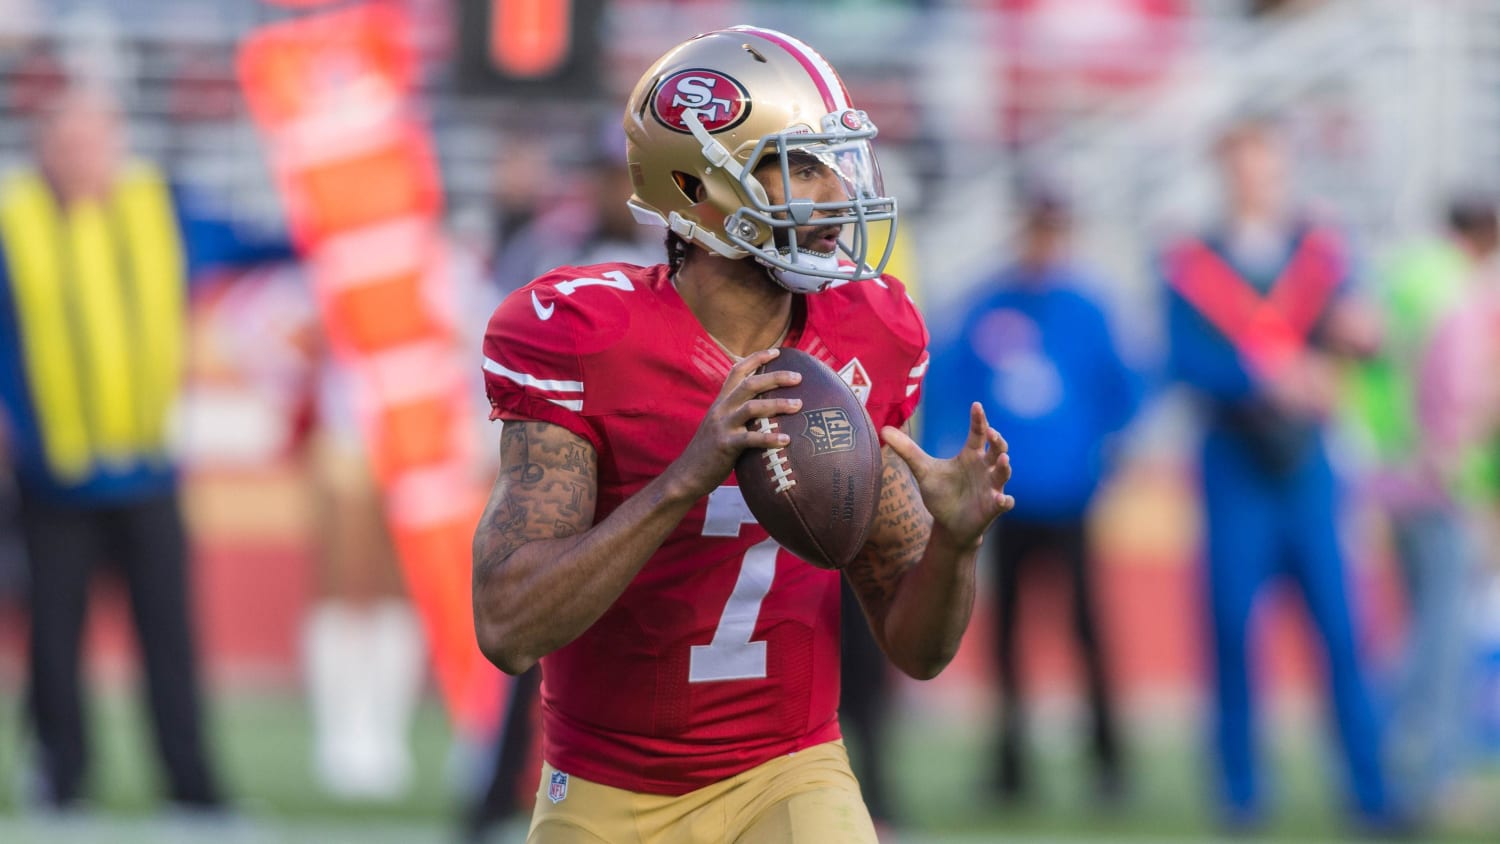 What we know: The key details on Colin Kaepernick's workout for NFL teams